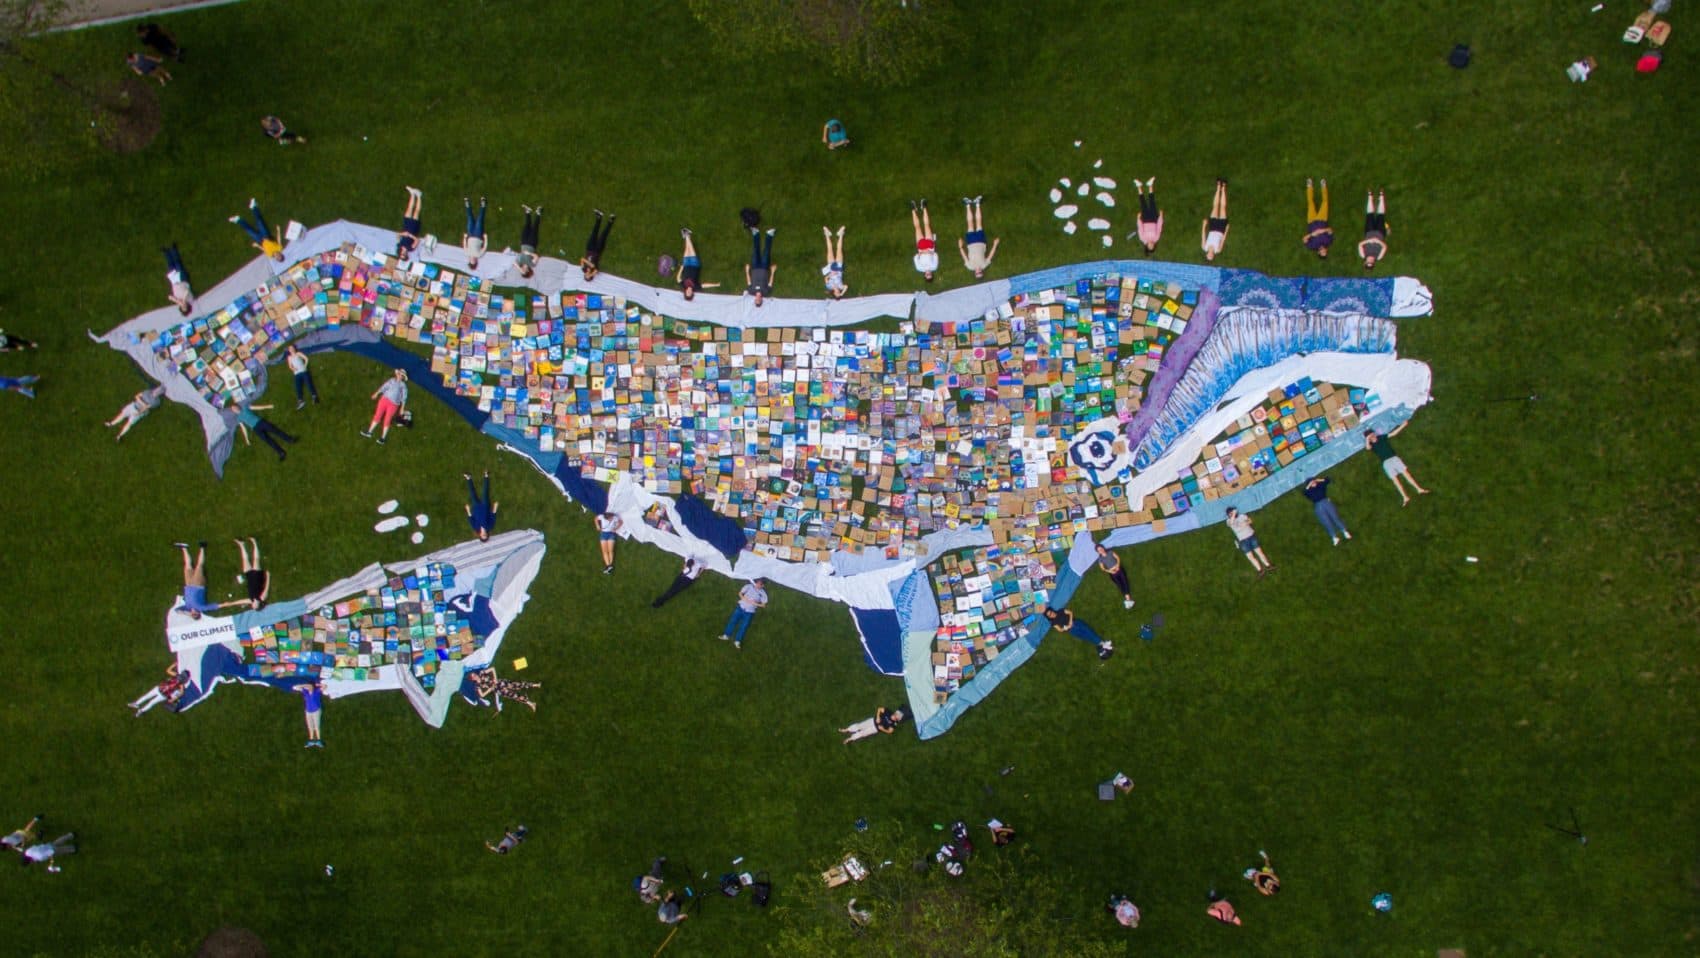 Young climate activists constructed a 100-foot mosaic out of 1,200 individually painted tiles. (Courtesy of Lucian Sharpe/Our Climate)